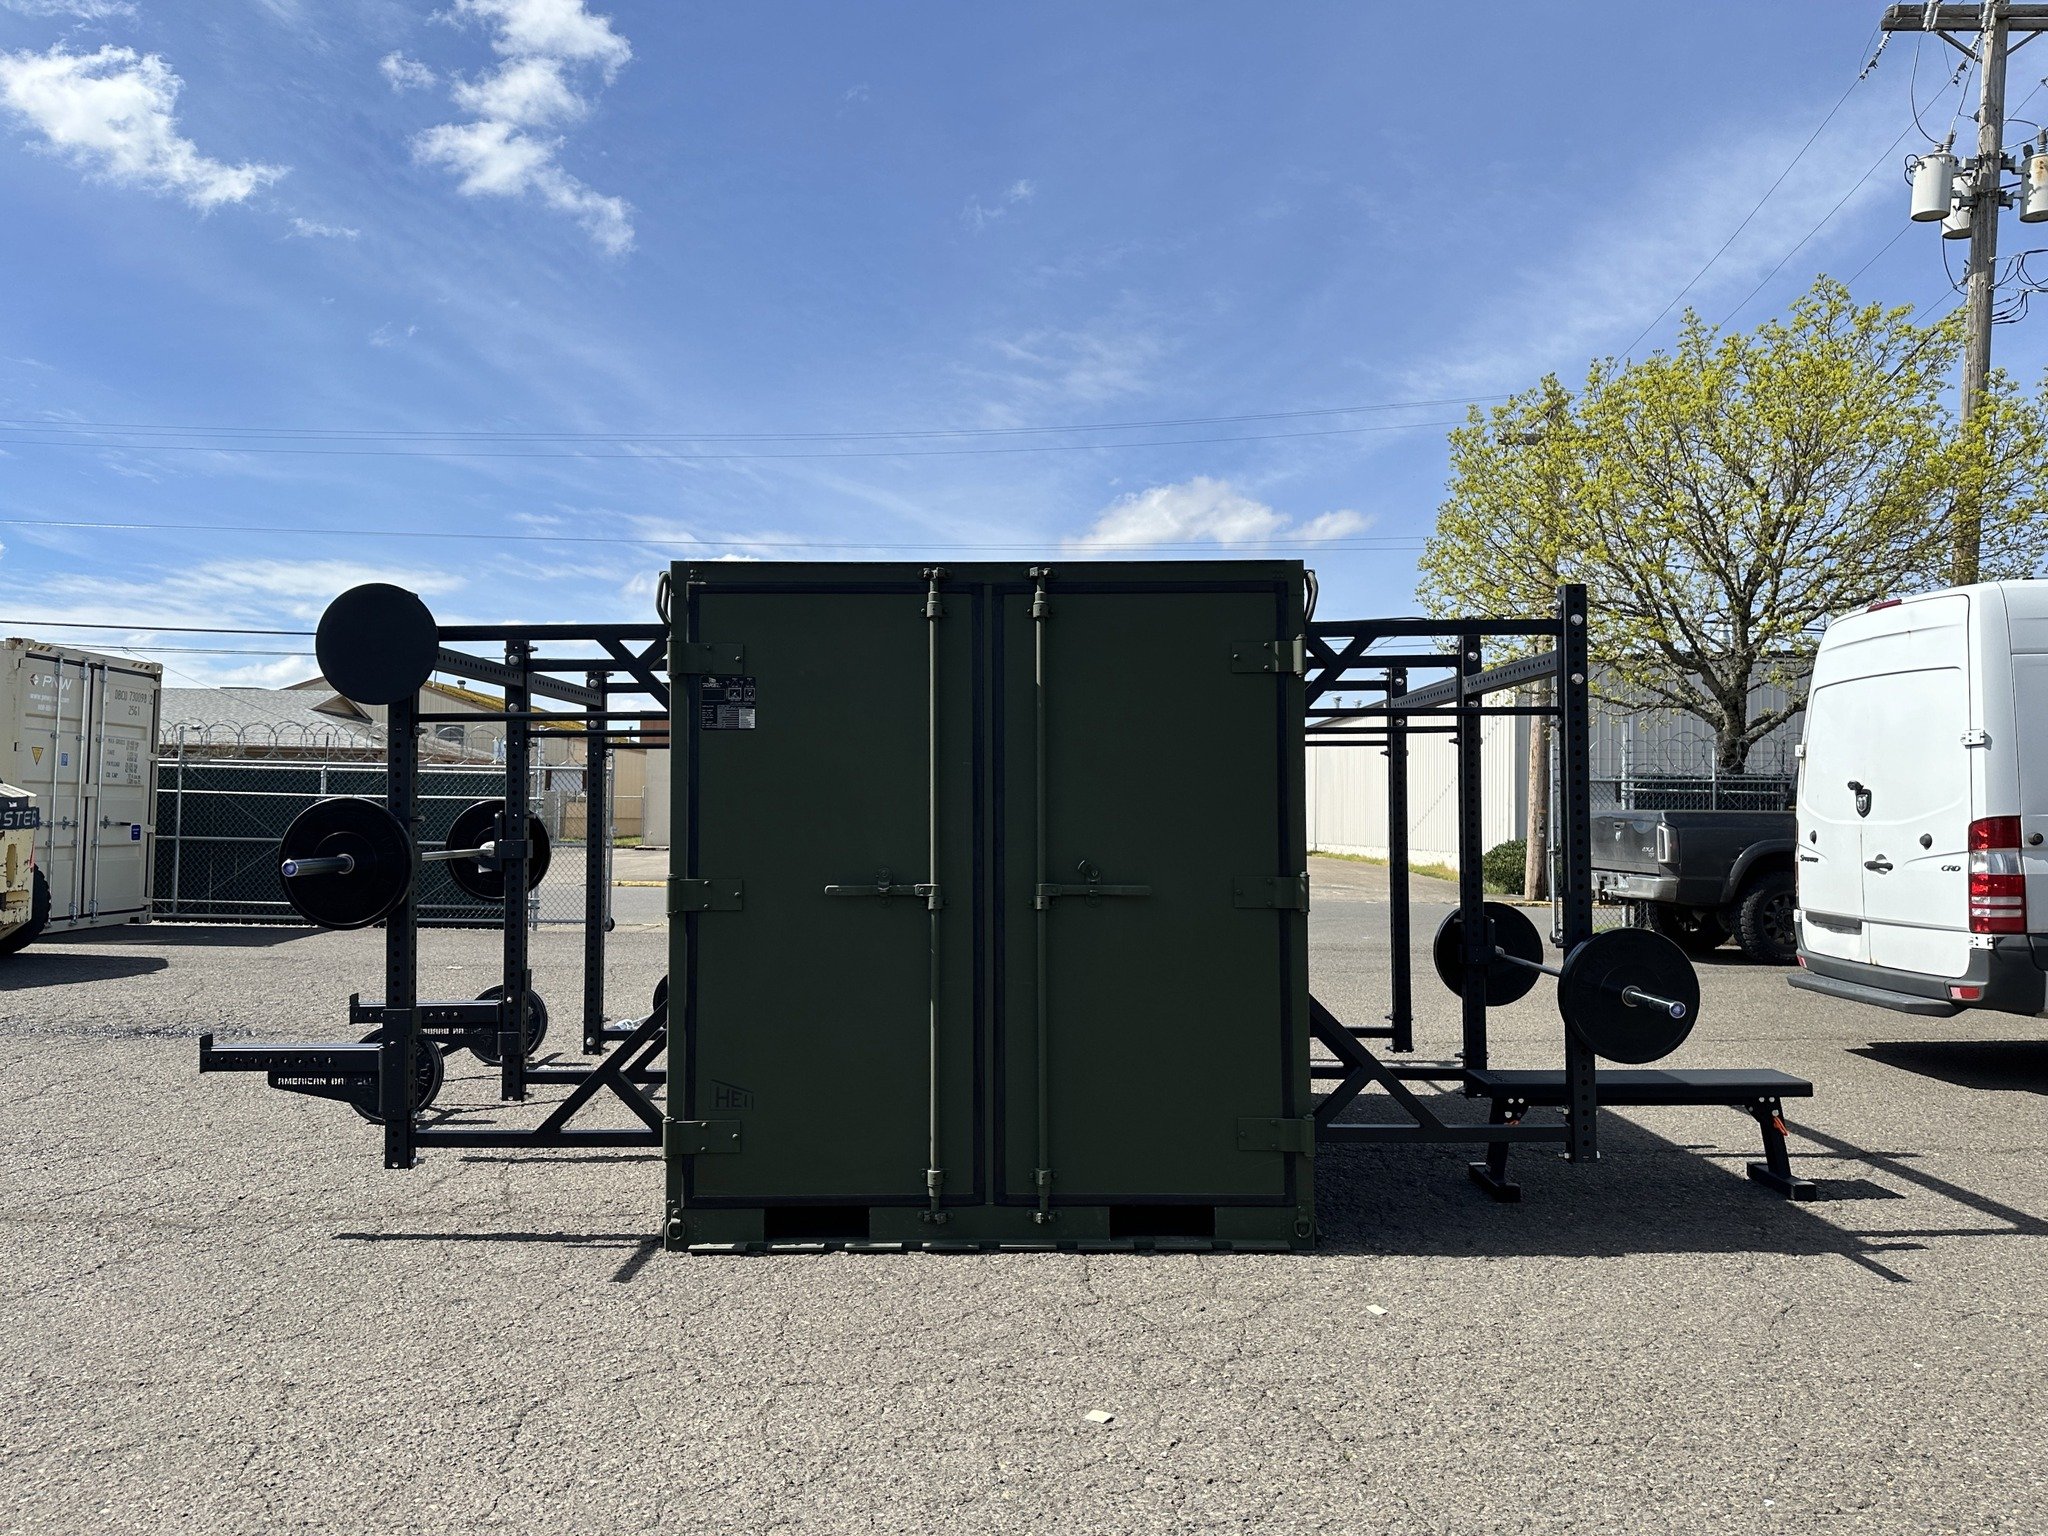 Level up your gym with StrongBox! 💪

Our turnkey system offers all the equipment for a complete workout in a compact design. Maximize your space and keep members happy.

#StrongBoxGymSolutions 
#SpaceSavingFitness 
#WesternShelter